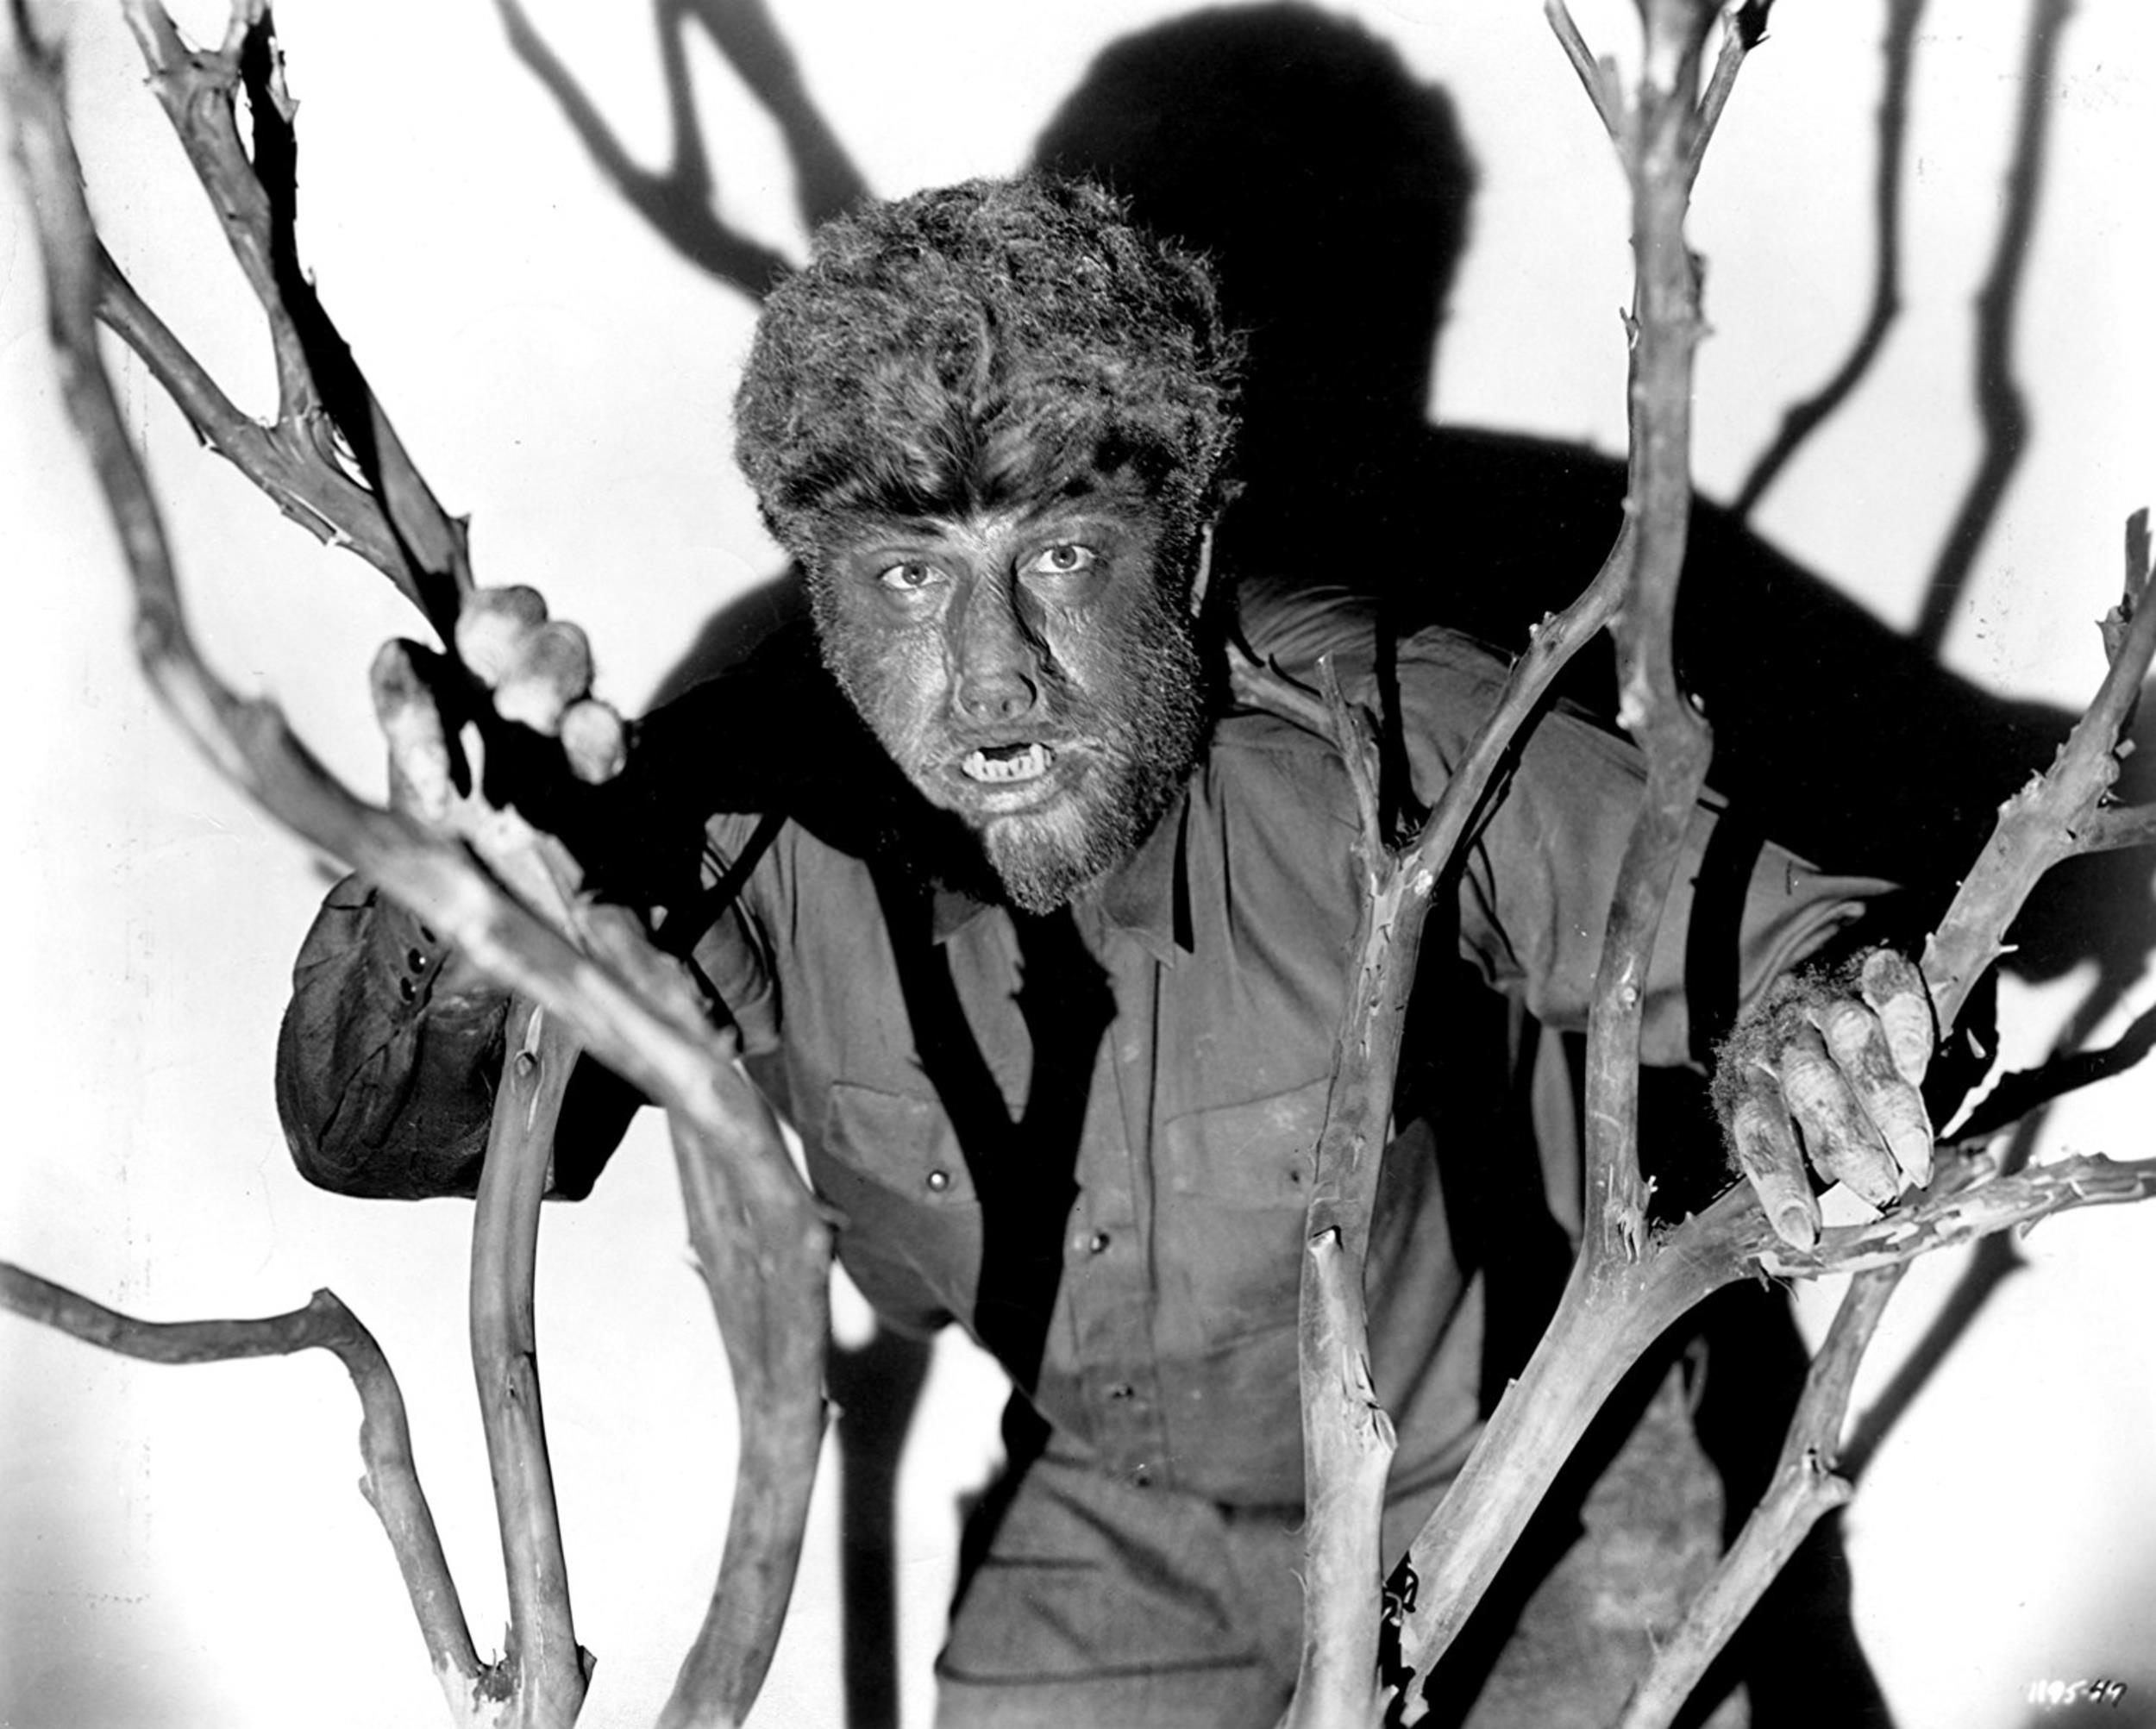 <p>Director George Waggner and screenwriter Curt Siodmak collaborated for one of Universal’s finest horror films, which stars Lon Chaney Jr. as the cursed Larry Talbot. The highlight of the movie is Talbot’s progressive transformation into a werewolf, which set a high standard for creature visual f/x. (Makeup maestros like Rick Baker still marvel at it.) While "The Wolf Man" was a celebrated part of the Universal Monsters franchise, the furry fella never got another sequel unto himself. Many fans include 1935’s unrelated “Werewolf of London” as part of the series, with “Frankenstein Meets the Wolf Man” and the June Lockhart-starring “She-Wolf of London” as official follow-ups (even though the latter has nothing to do with the Talbot story).</p><p>You may also like: <a href='https://www.yardbarker.com/entertainment/articles/the_20_best_movie_trilogies_of_all_time_012324/s1__39668197'>The 20 best movie trilogies of all time</a></p>